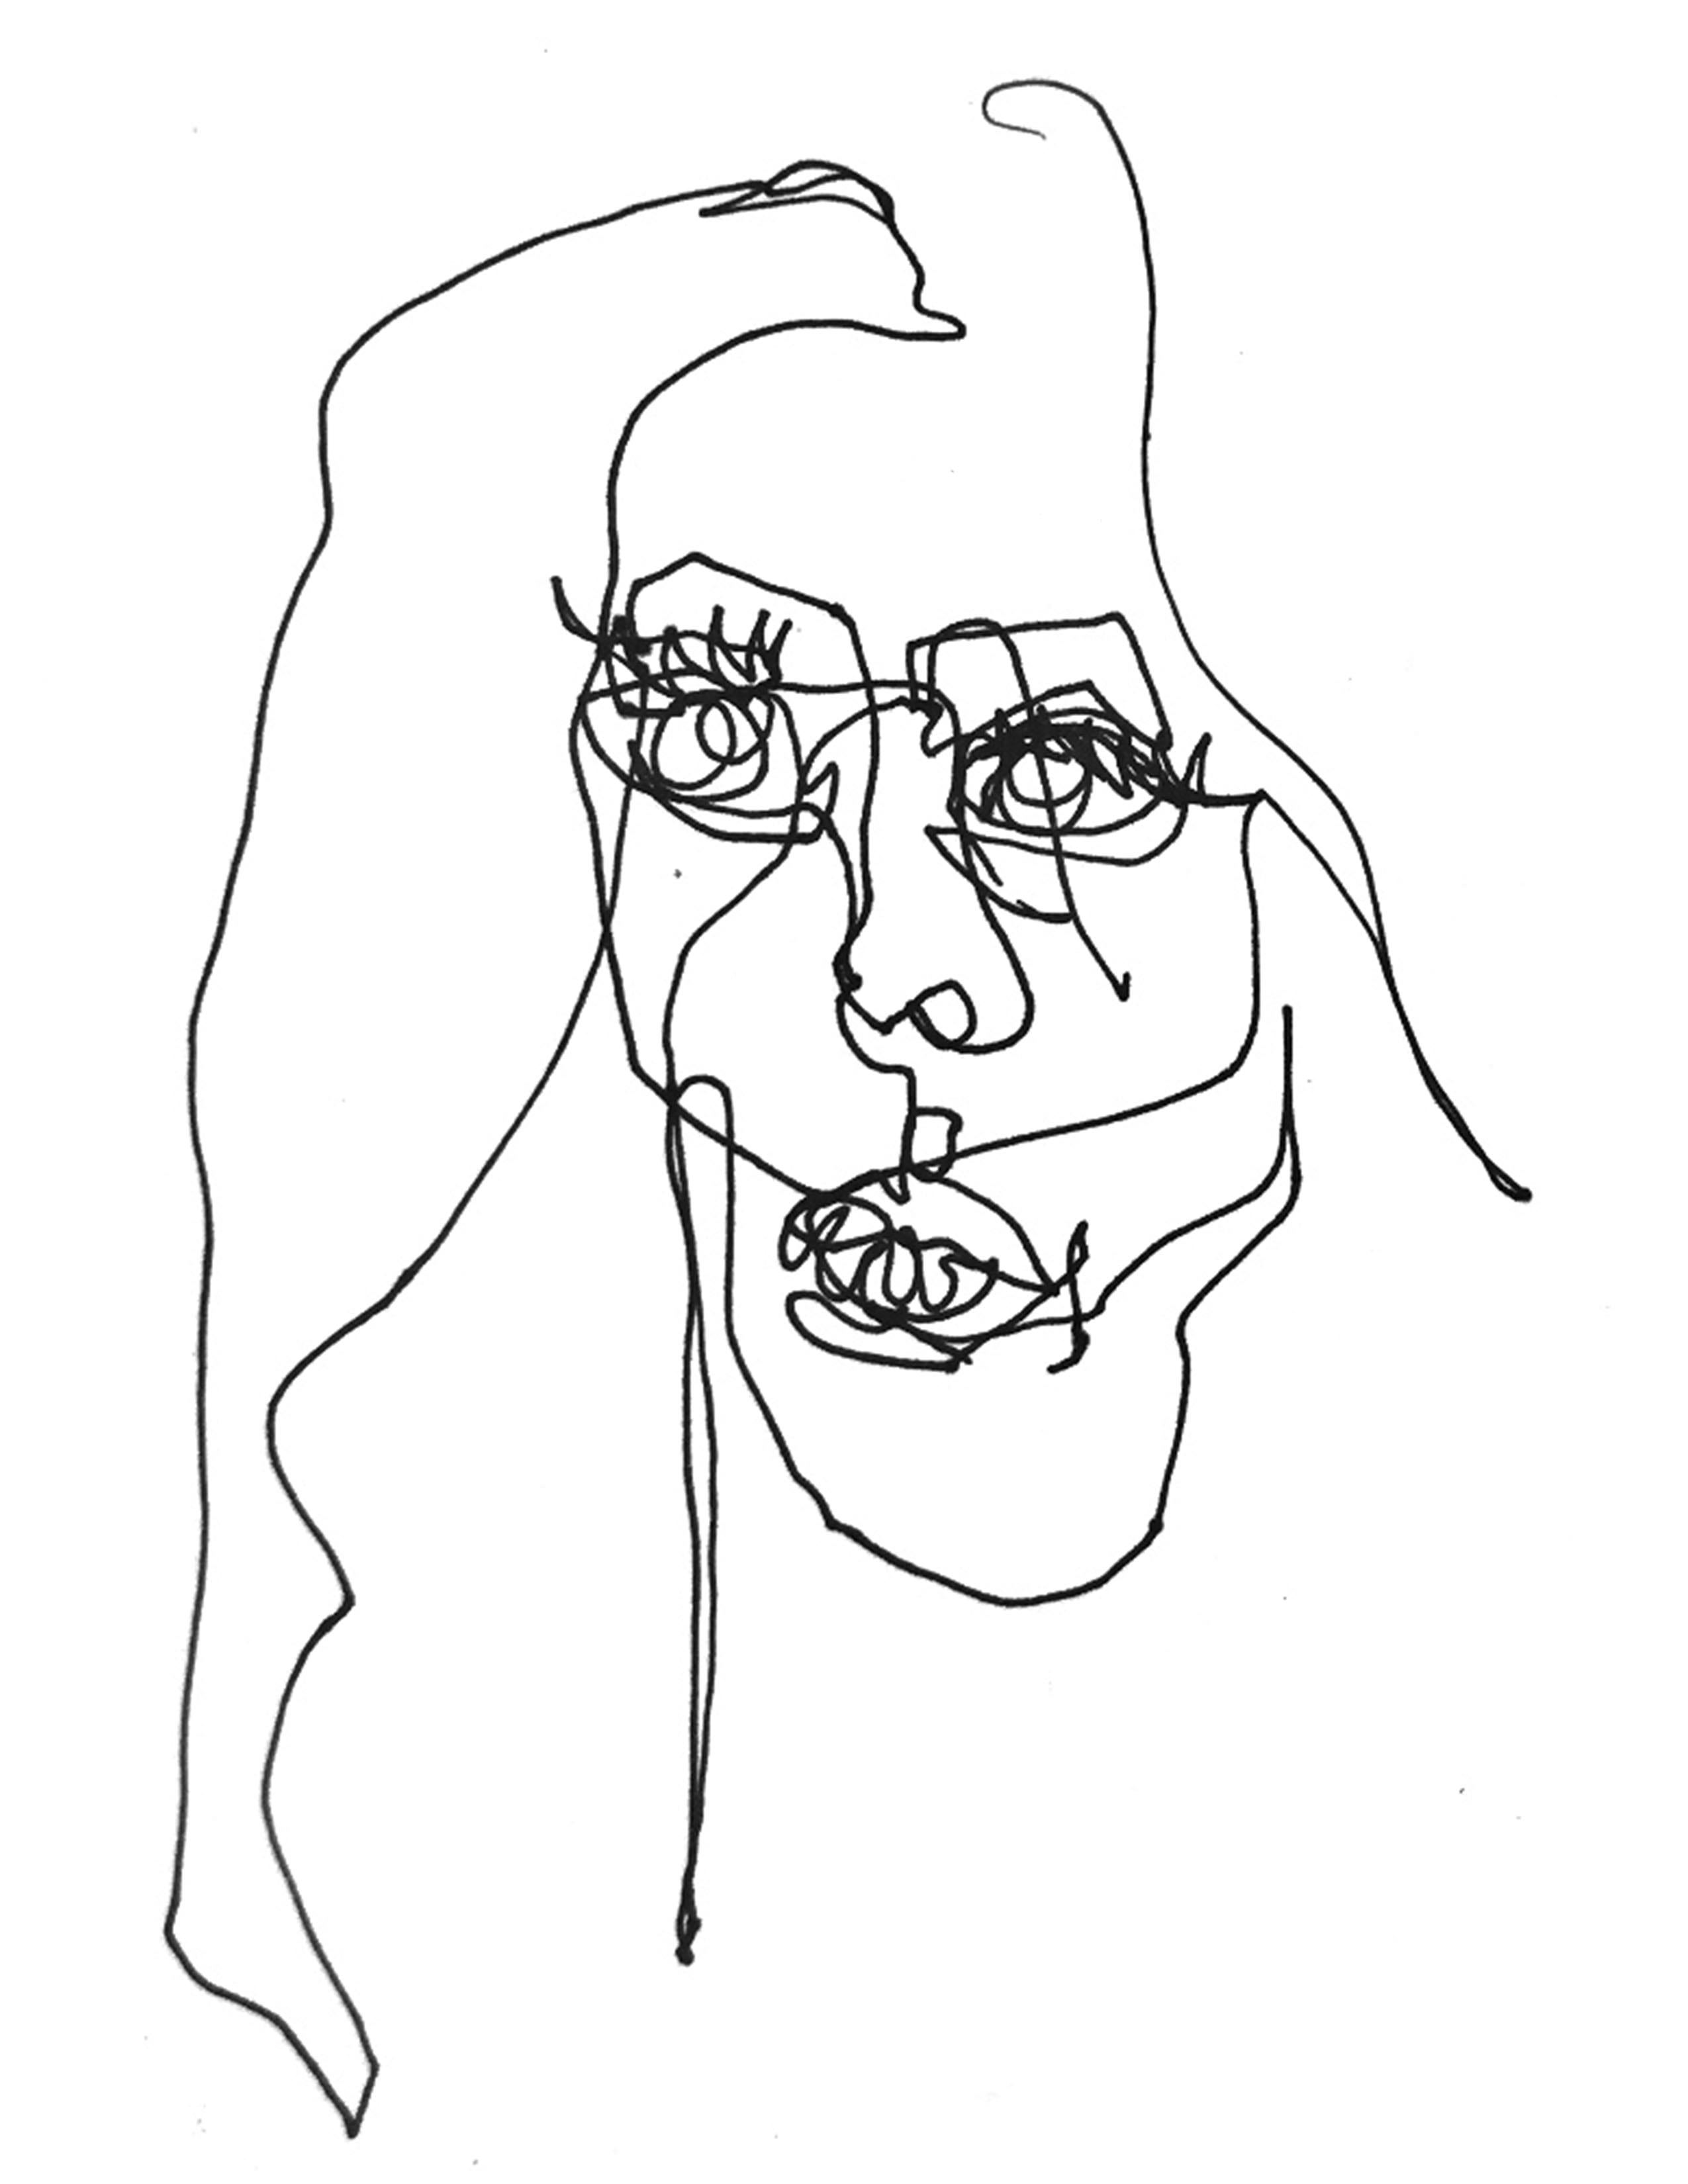 “Self as Blind Contour Drawing”